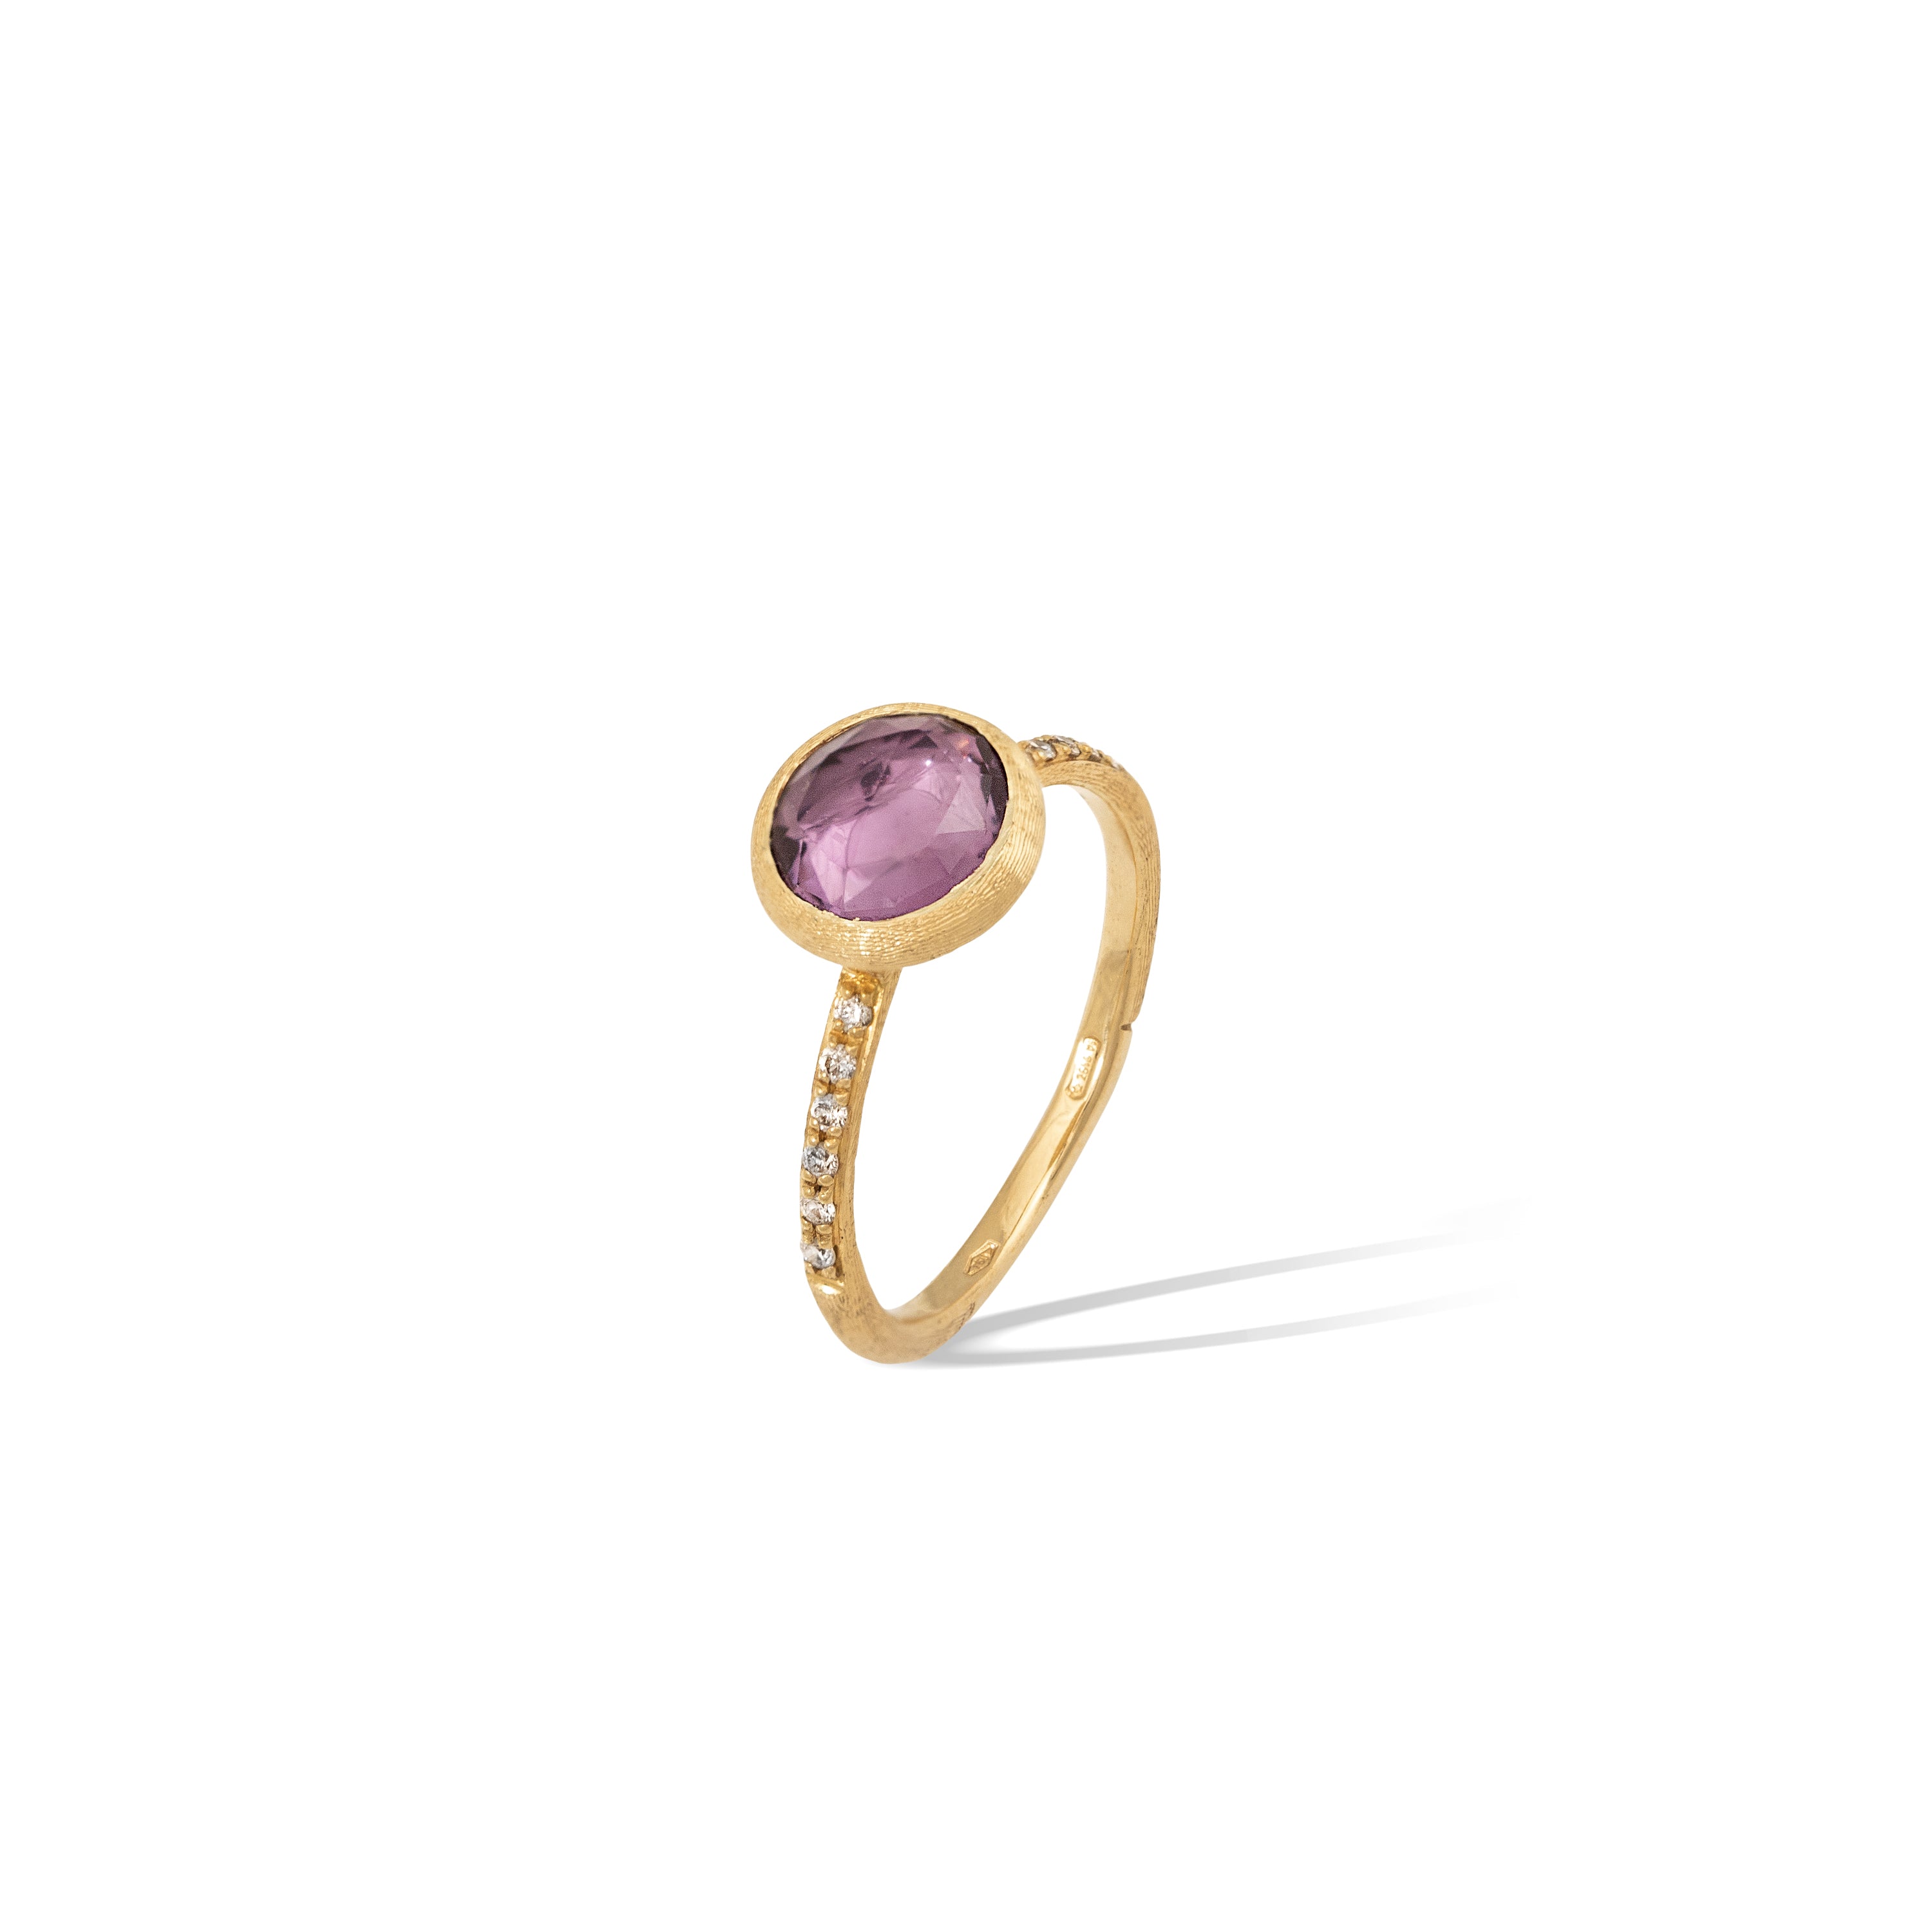 18K YELLOW GOLD AMETHYST RING FROM THE JAIPUR COLLECTION